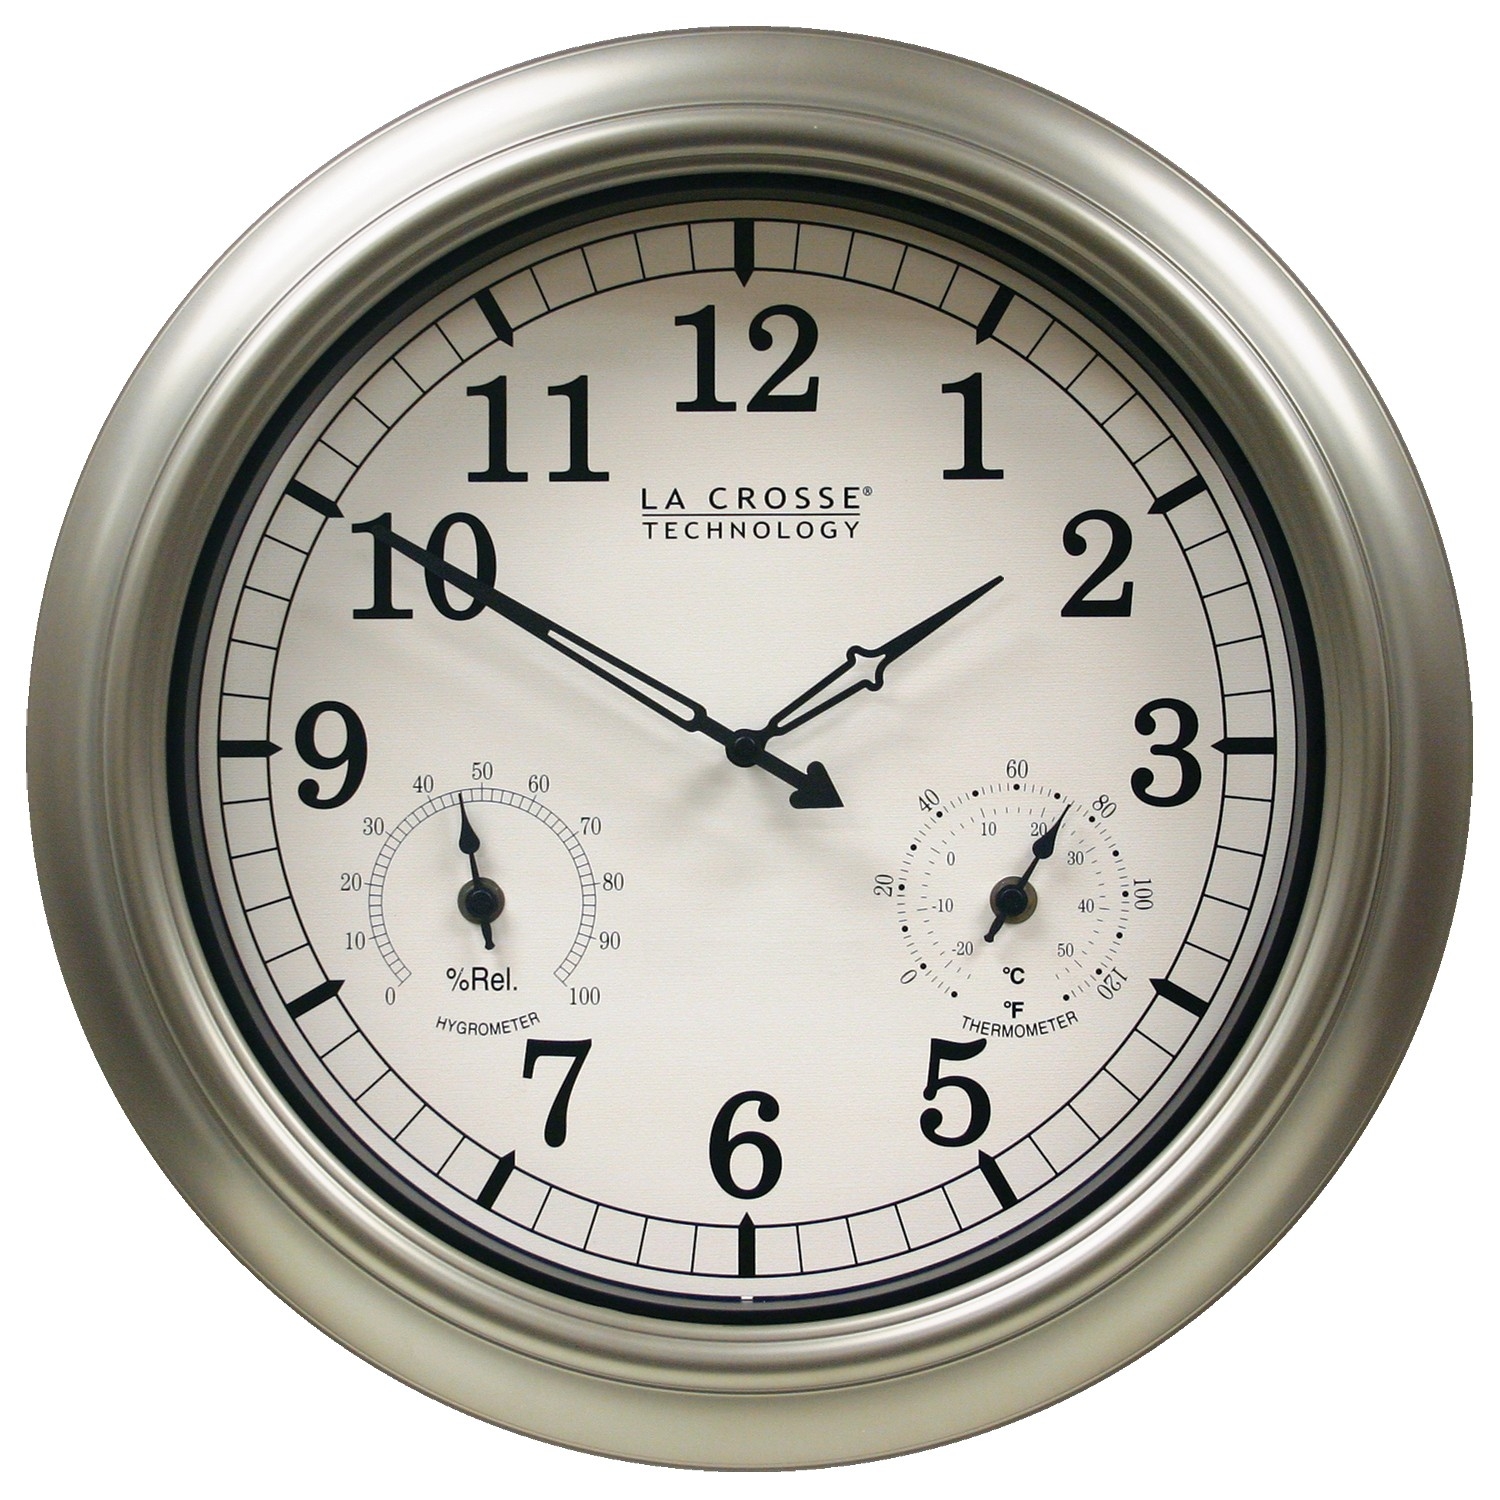 La Crosse Technology WT-3181PL-INT 18 inch Atomic Outdoor Clock with Temperature & Humidity